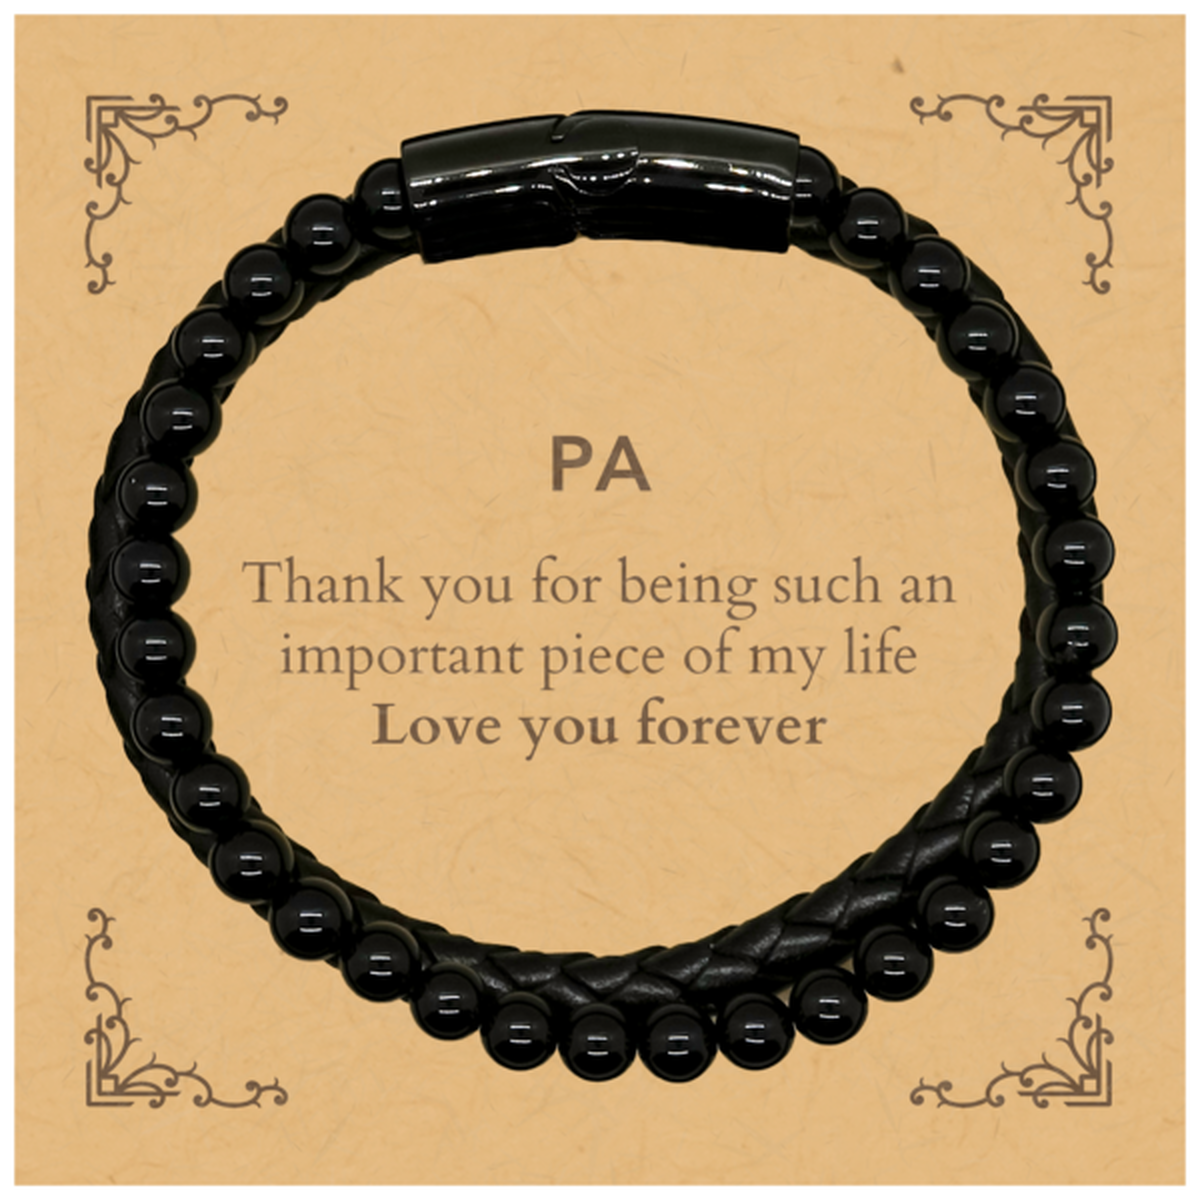 Appropriate Pa Stone Leather Bracelets Epic Birthday Gifts for Pa Thank you for being such an important piece of my life Pa Christmas Mothers Fathers Day